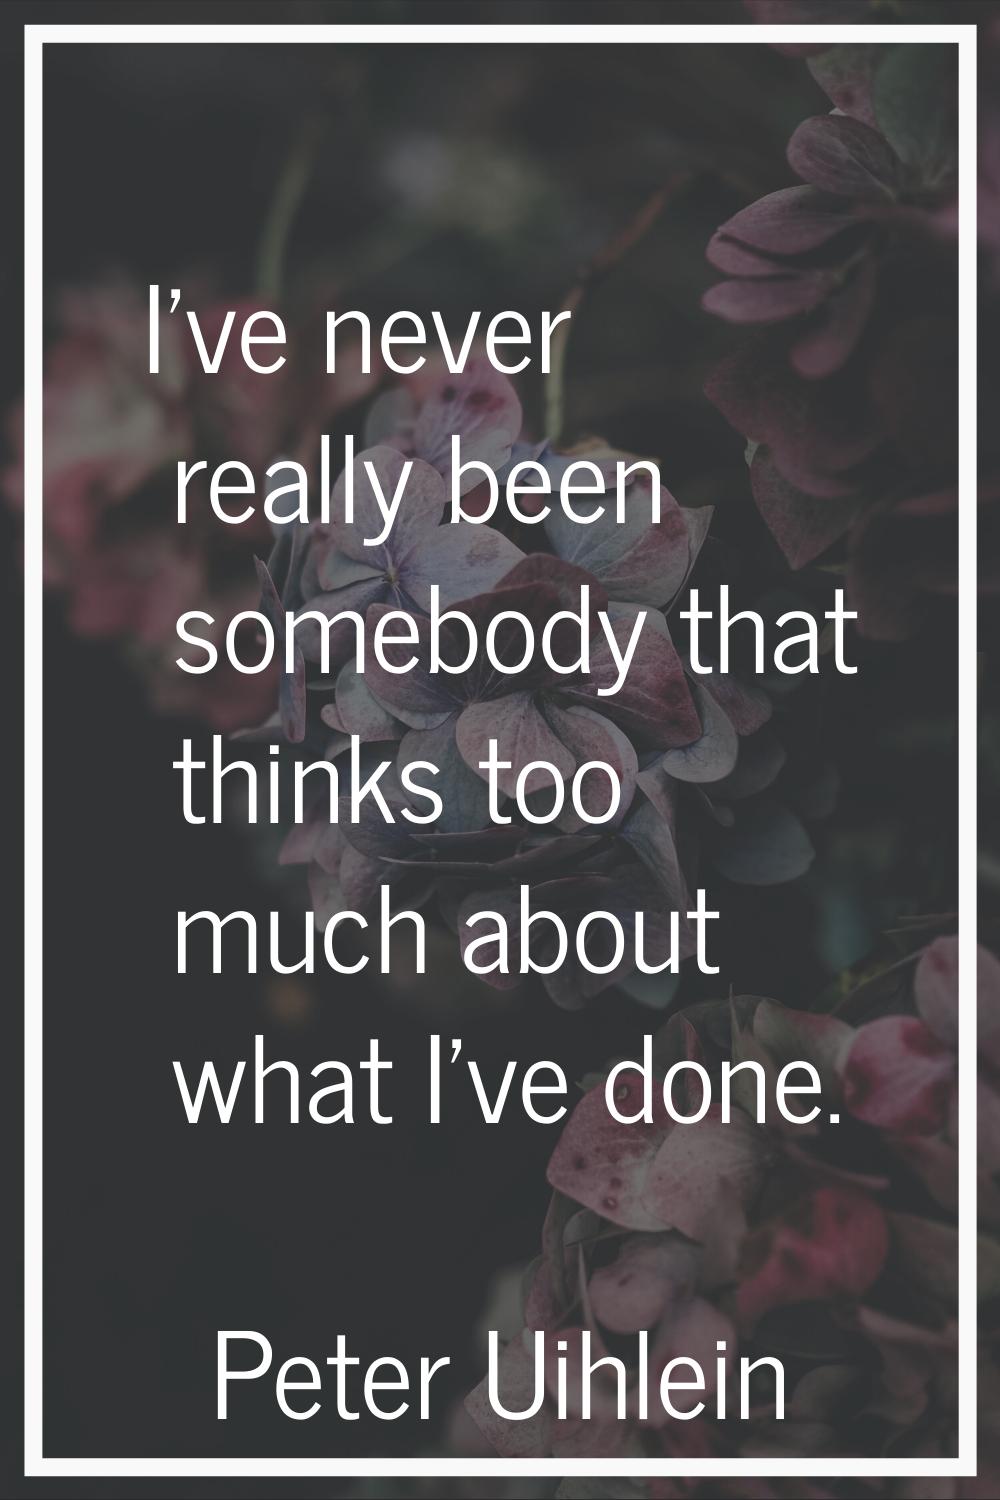 I've never really been somebody that thinks too much about what I've done.